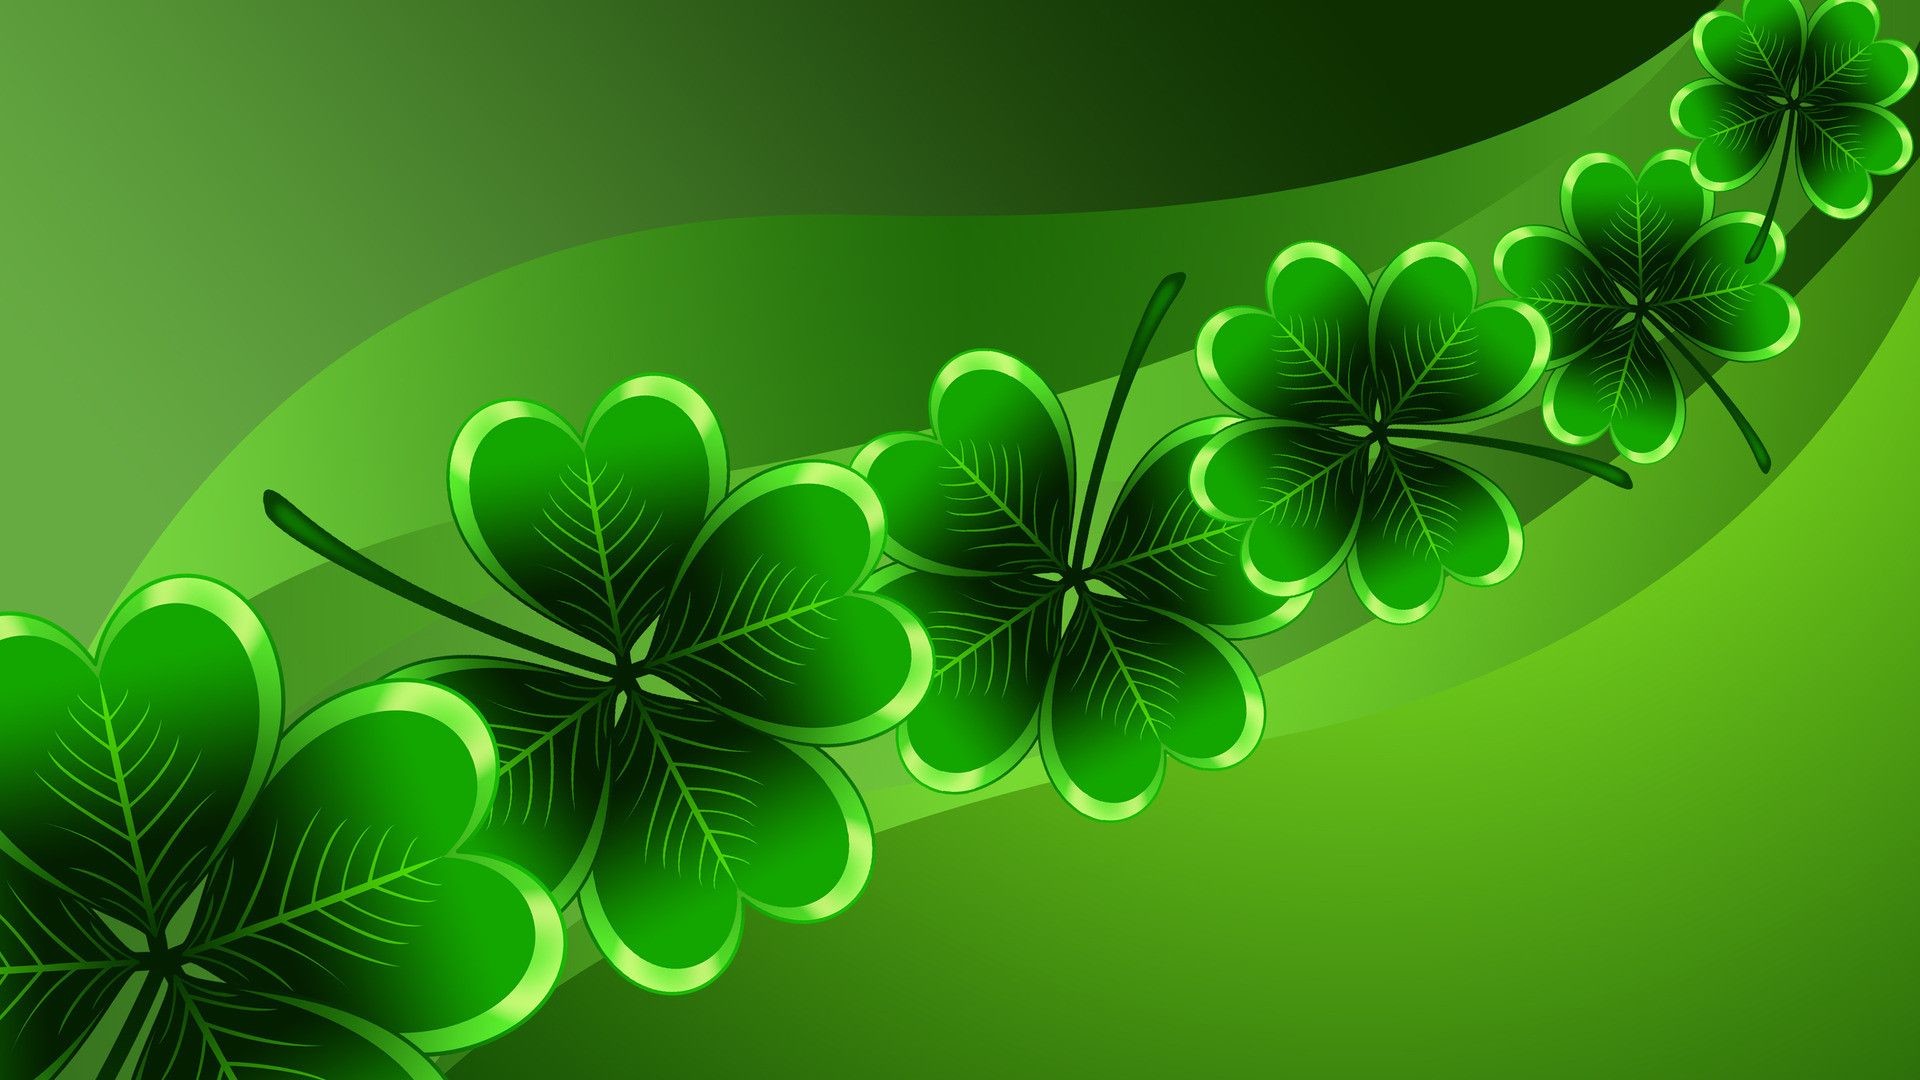 1920x1080 Free Downloaod St Patricks Day Backgrounds.